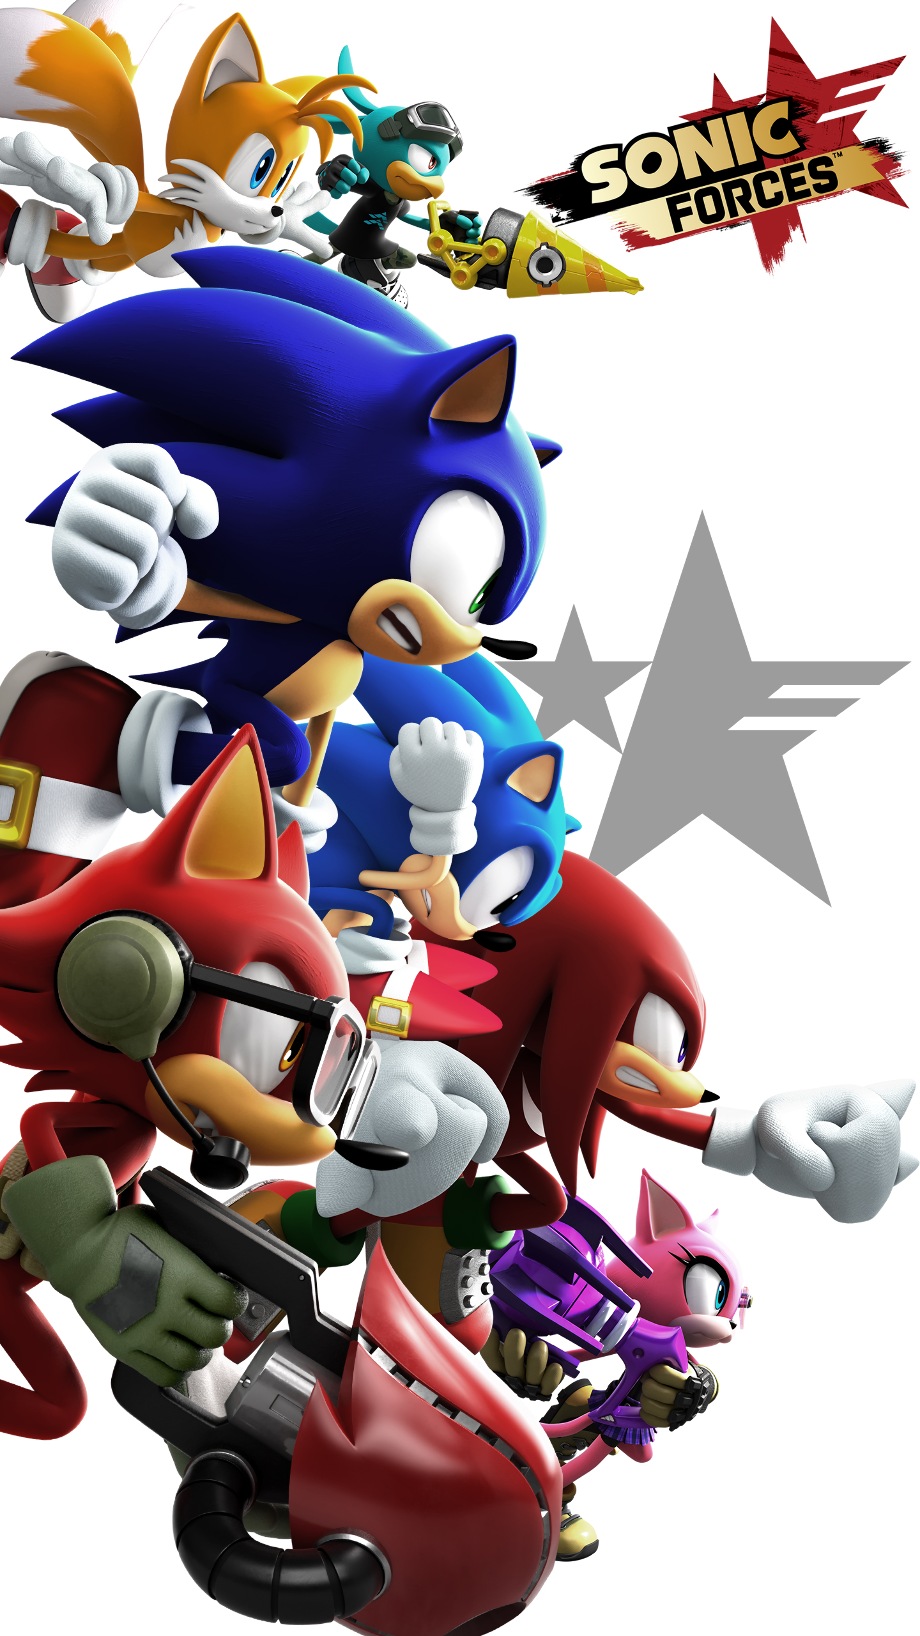 sonic forces logo wiki